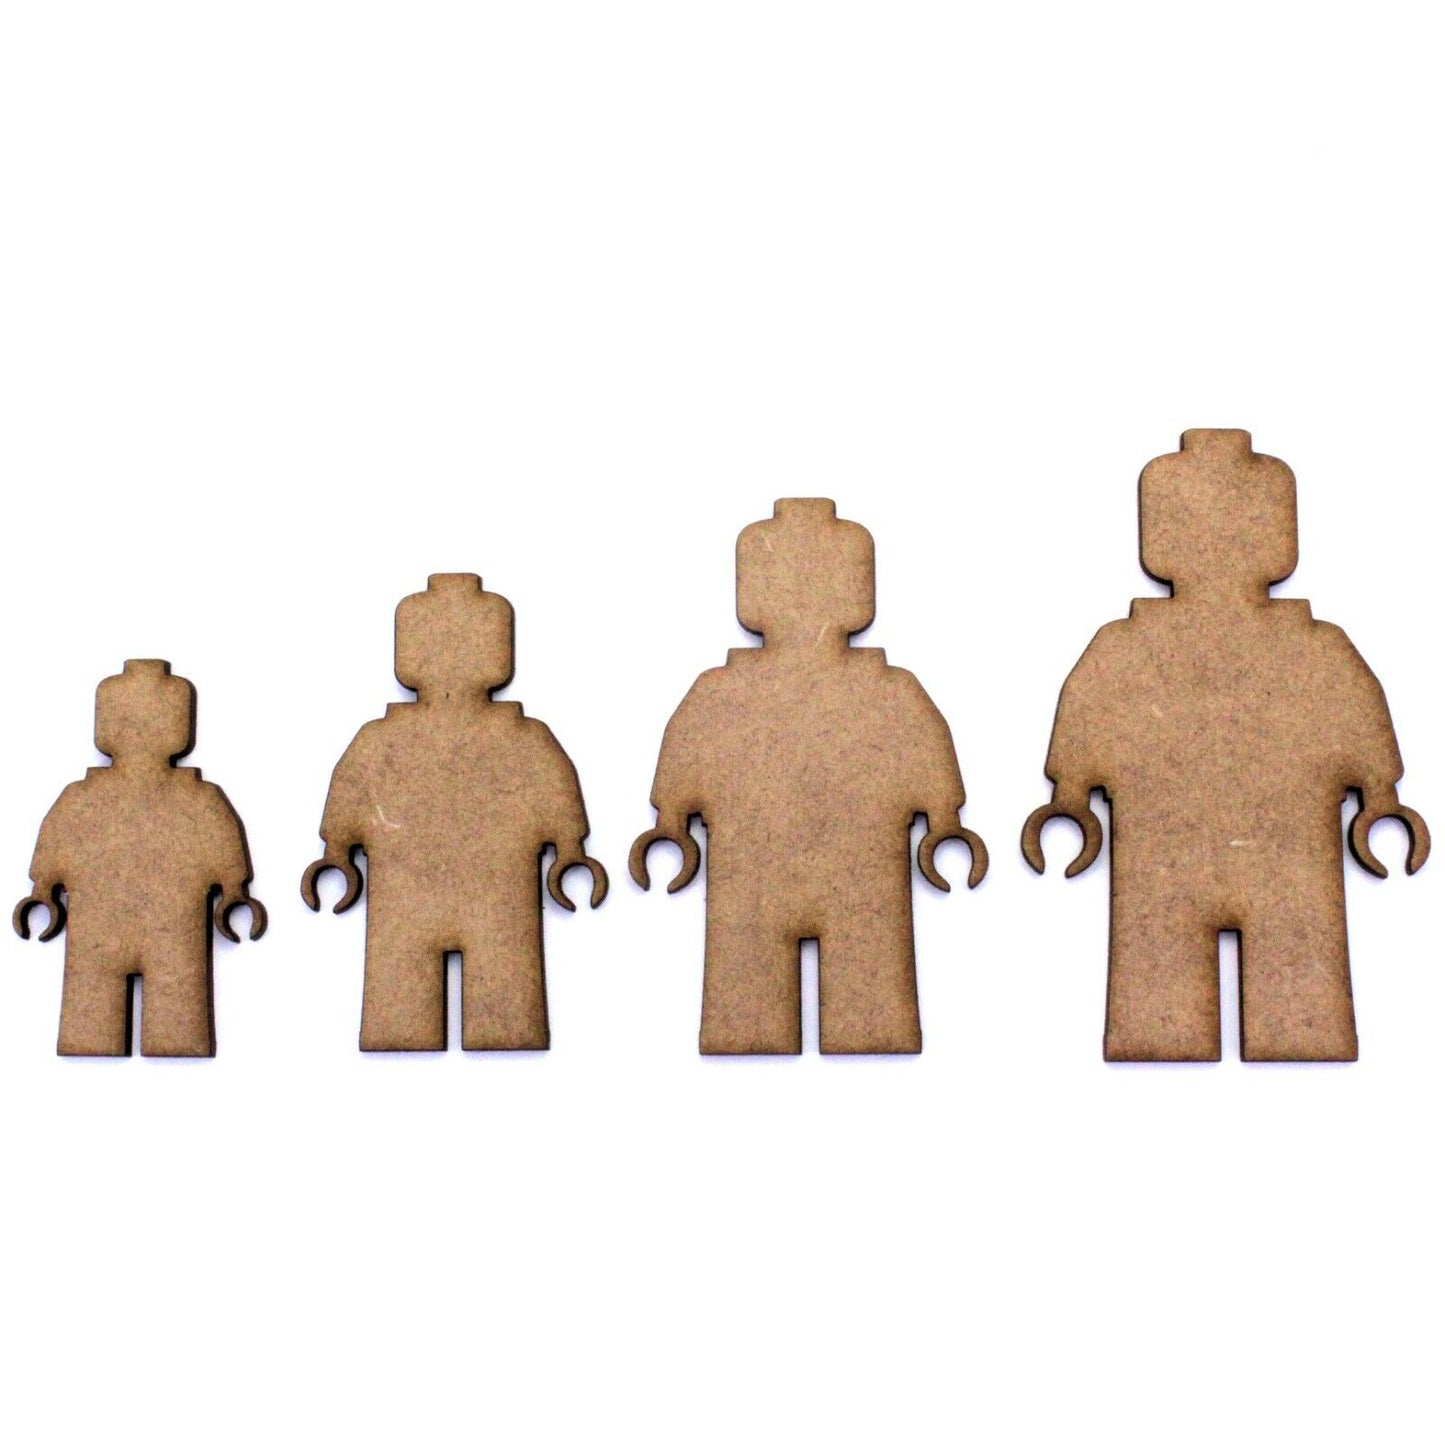 Lego Minifig Man/Woman Craft Shapes. Various Sizes 50mm - 200mm. 2mm MDF Wood